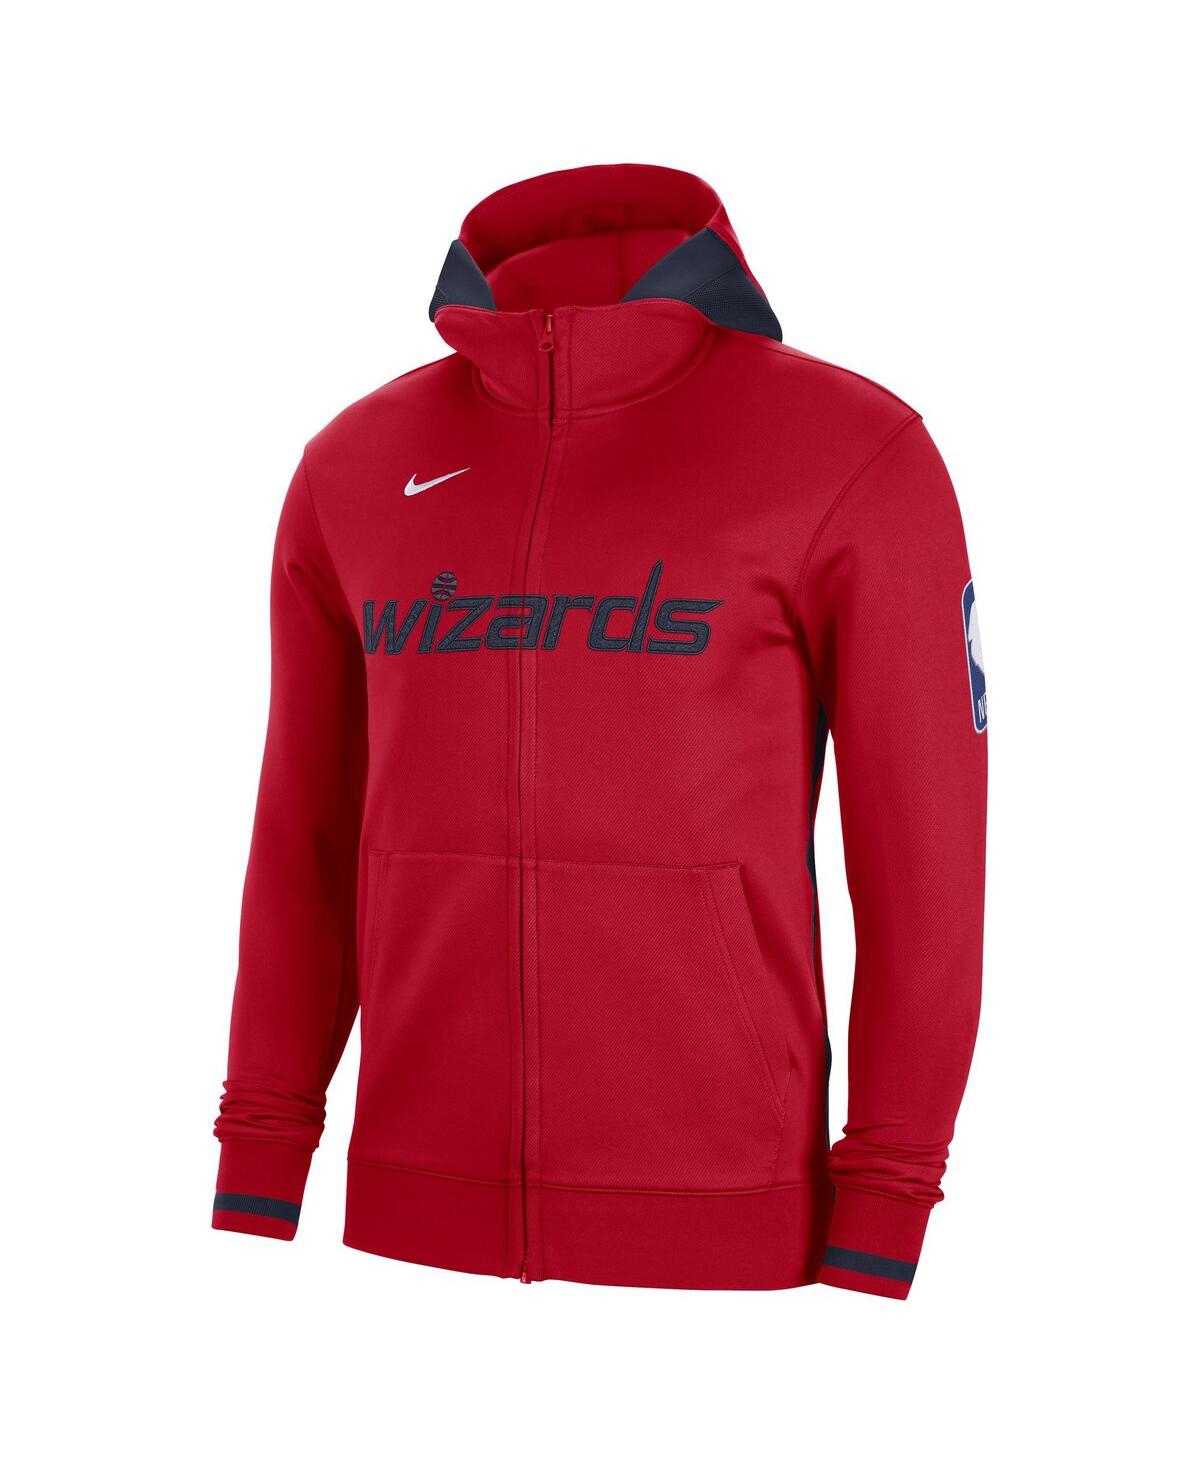 Shop Nike Men's  Red Washington Wizards Authentic Showtime Performance Full-zip Hoodie